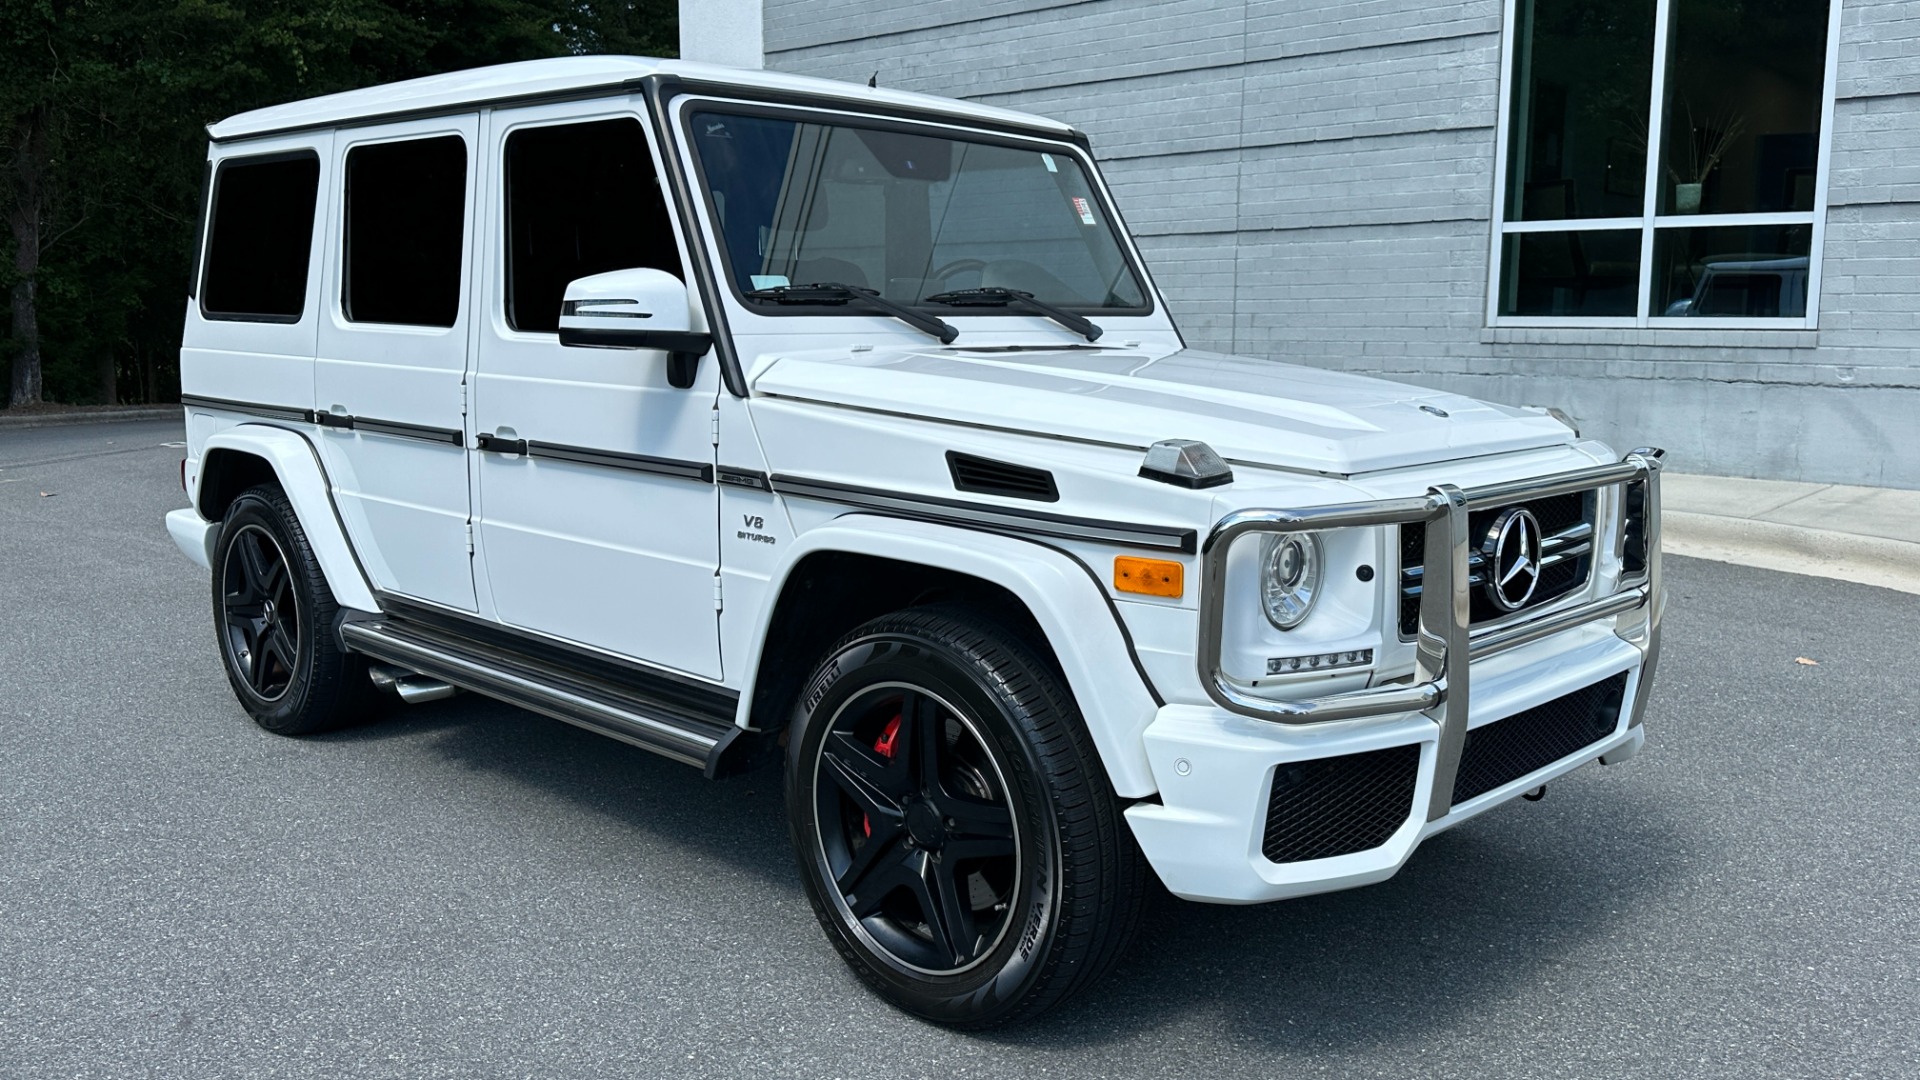 Used 2014 Mercedes-Benz G-Class G 63 AMG / DESIGNO LEATHER / DIAMOND STITCH / SPORTS SEATS / PA6 PKG for sale $67,995 at Formula Imports in Charlotte NC 28227 2